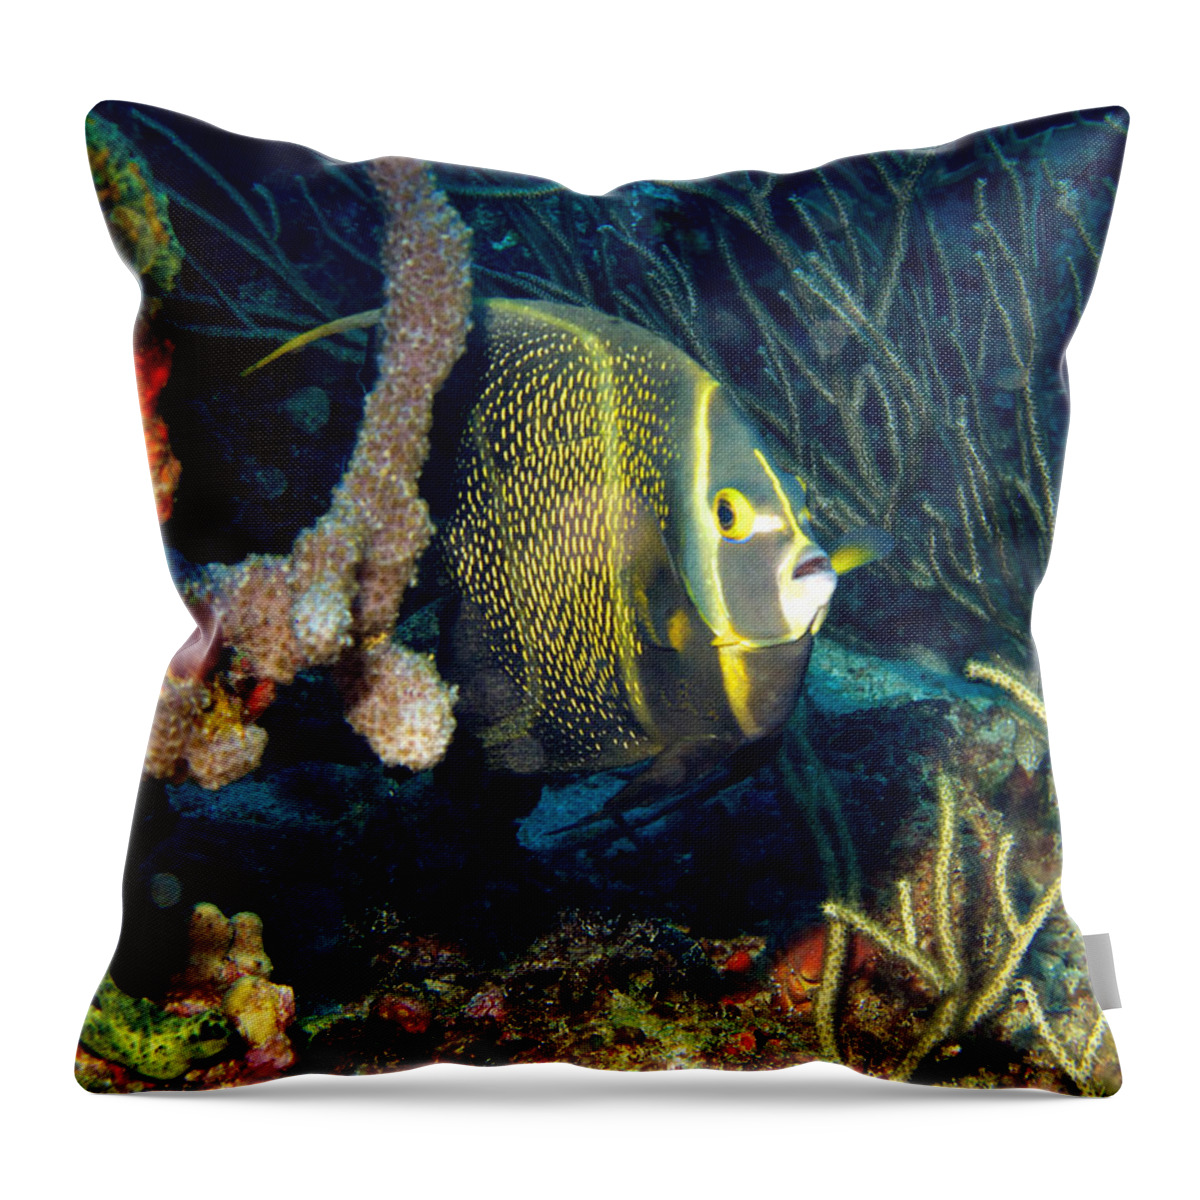 Bequia Throw Pillow featuring the photograph Bequia 02 by David Beebe